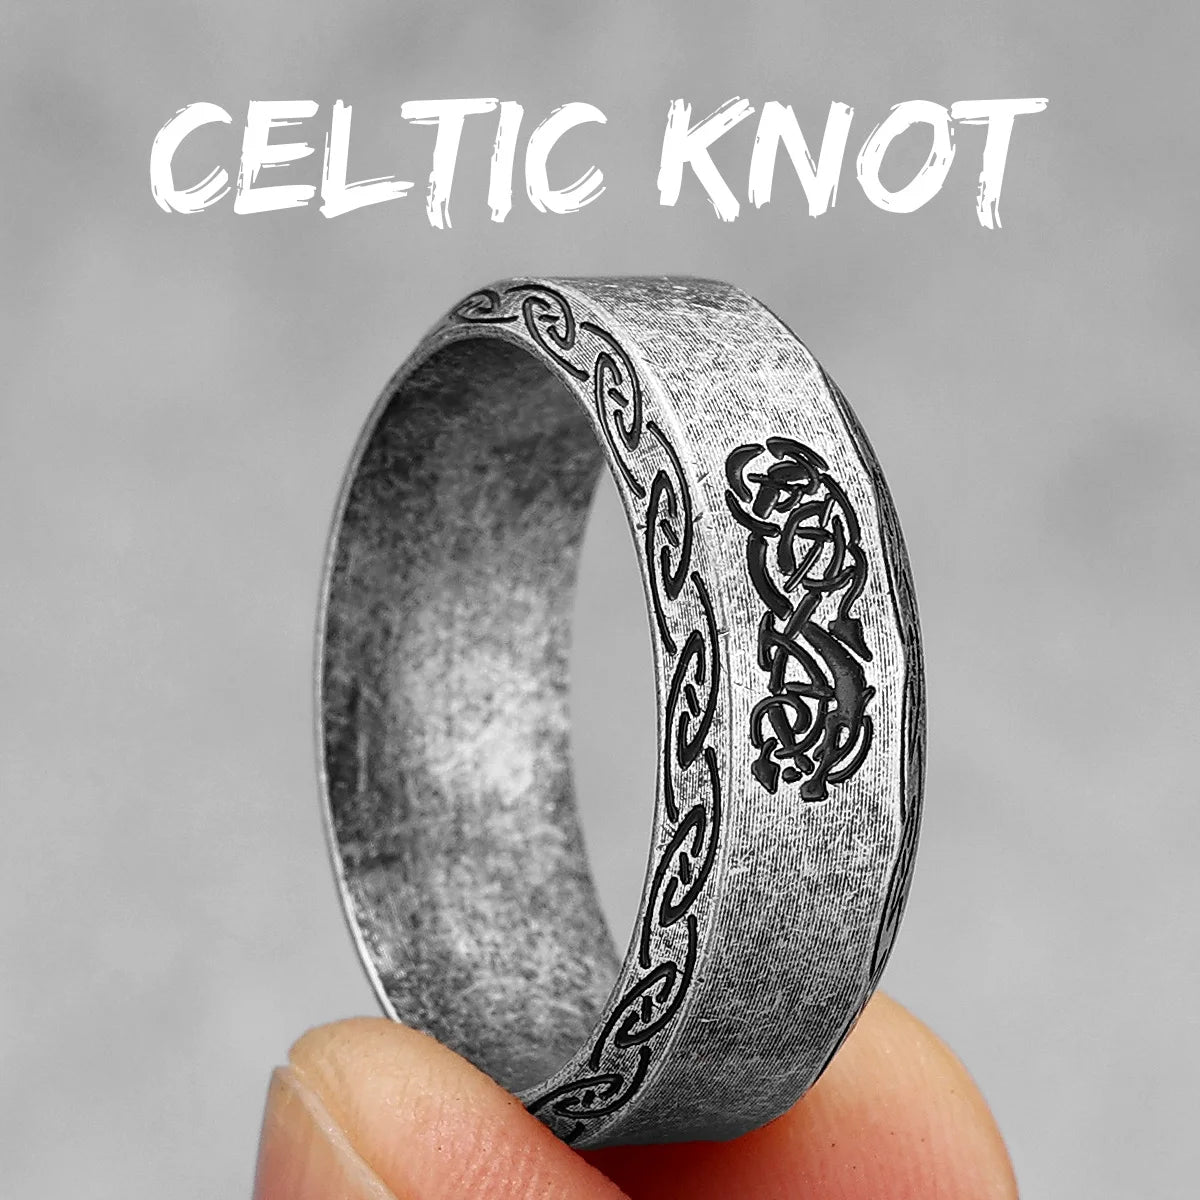 Vintage Edition - Viking Runes Celtic Knot Rings - Mythical Pieces 11 / R1009-Vintage Silver